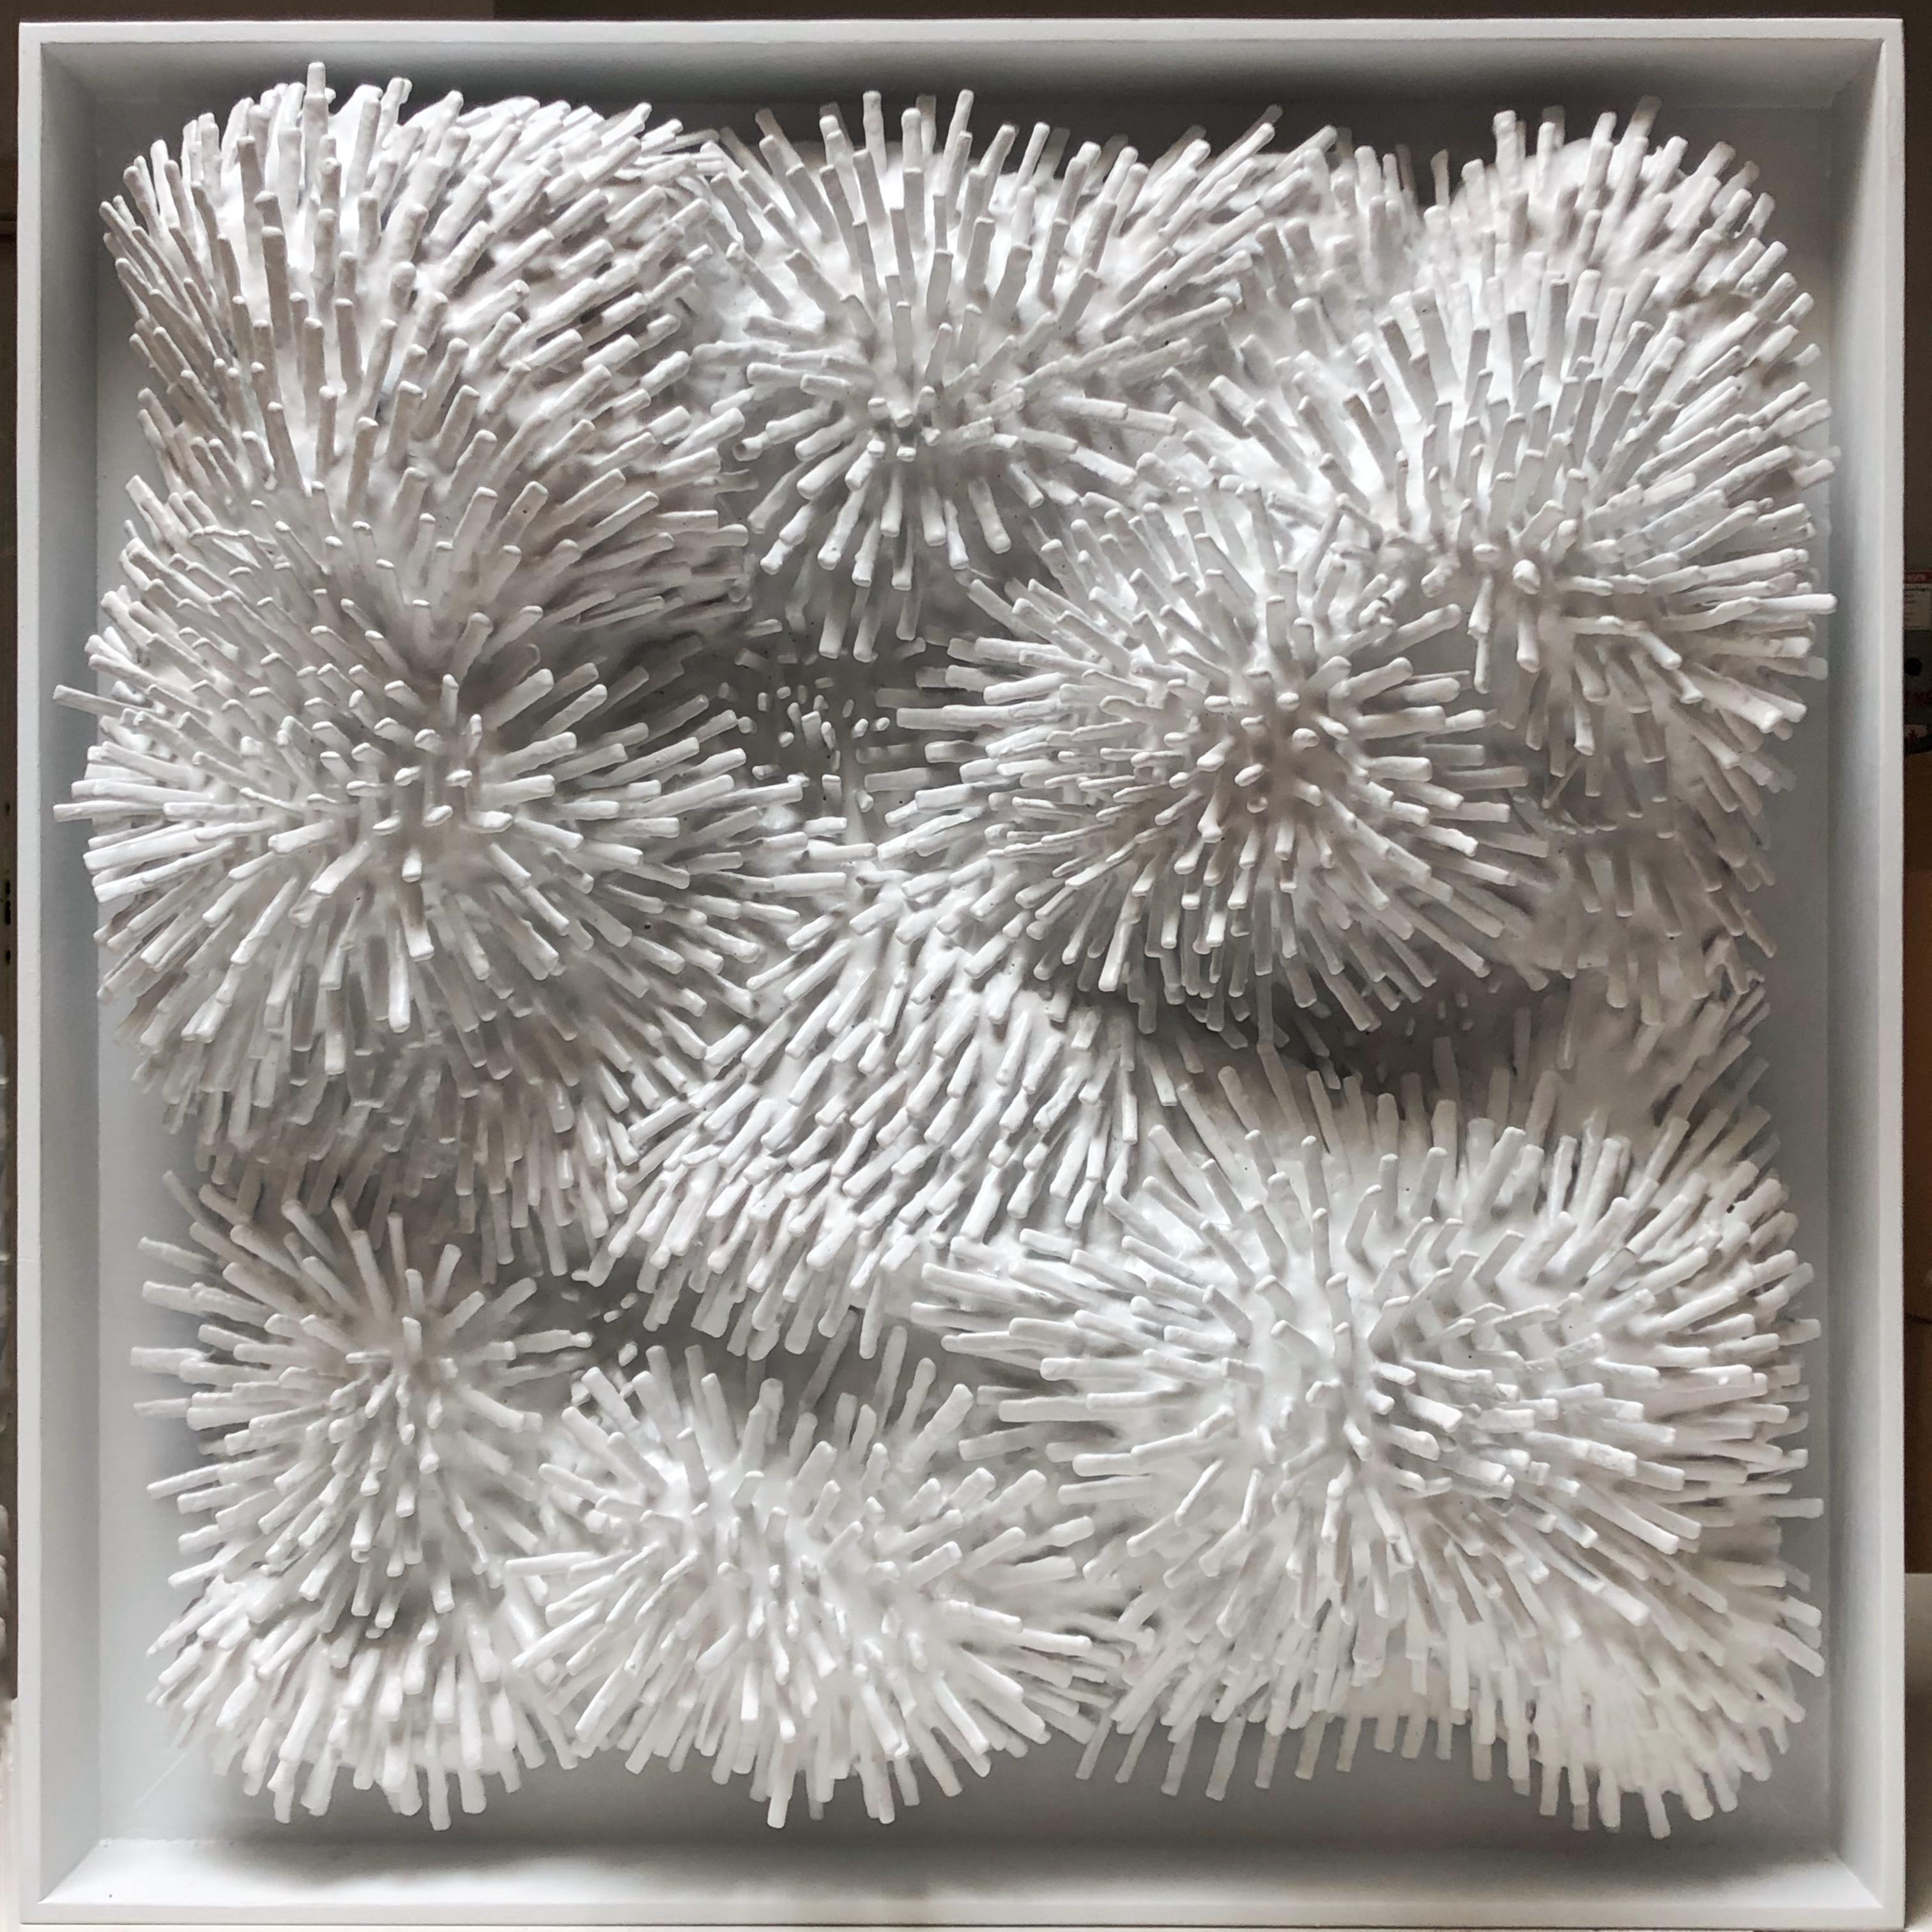 White Burst 2 - 3D organic feel contemporary abstract mural sculpture in foam